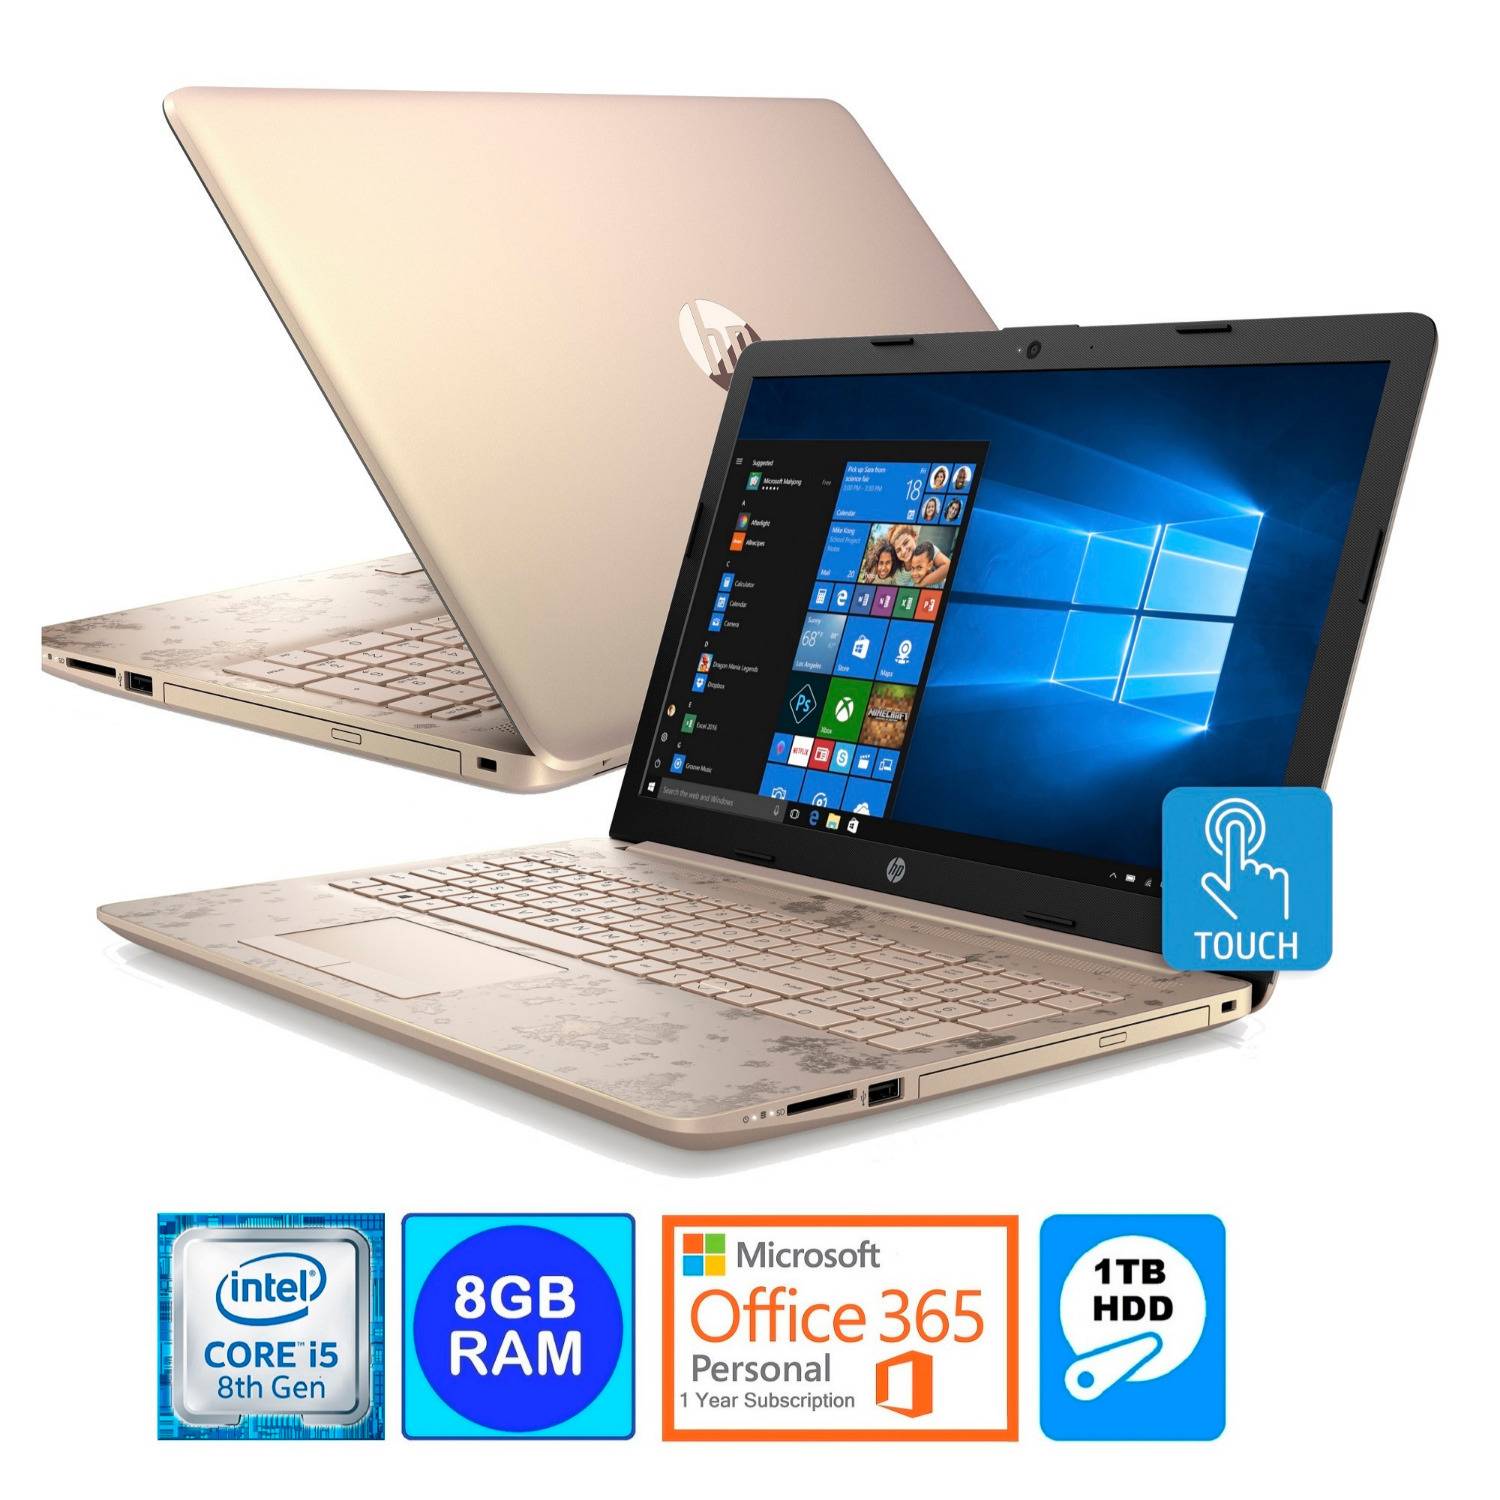 HP 15.6” HD Touch Screen Laptop Intel i5-8250U 8GB 1TB HDD Office 365 Personal 1Yr. (Pale Rose Gold)